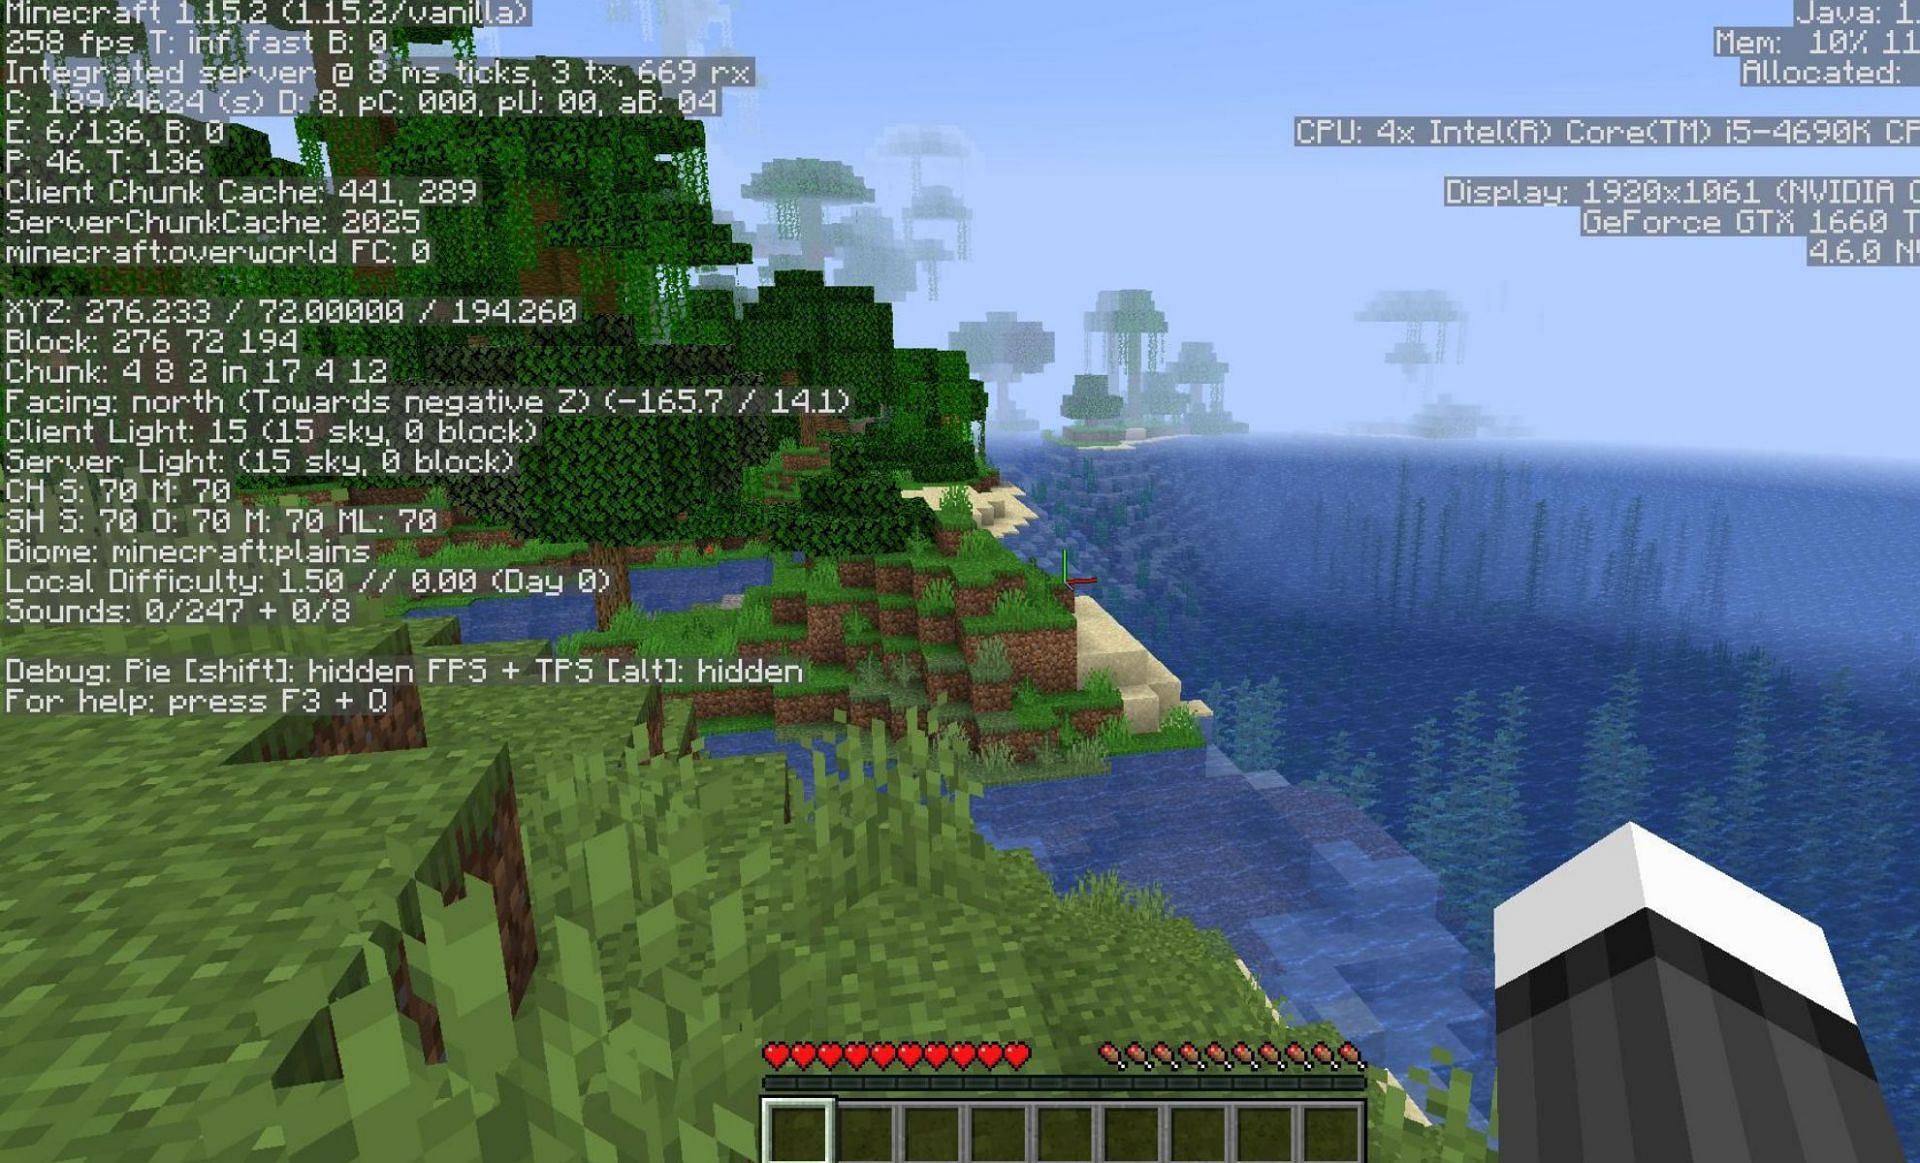 FPS stats can be seen on-screen (Image via Minecraft Forum)